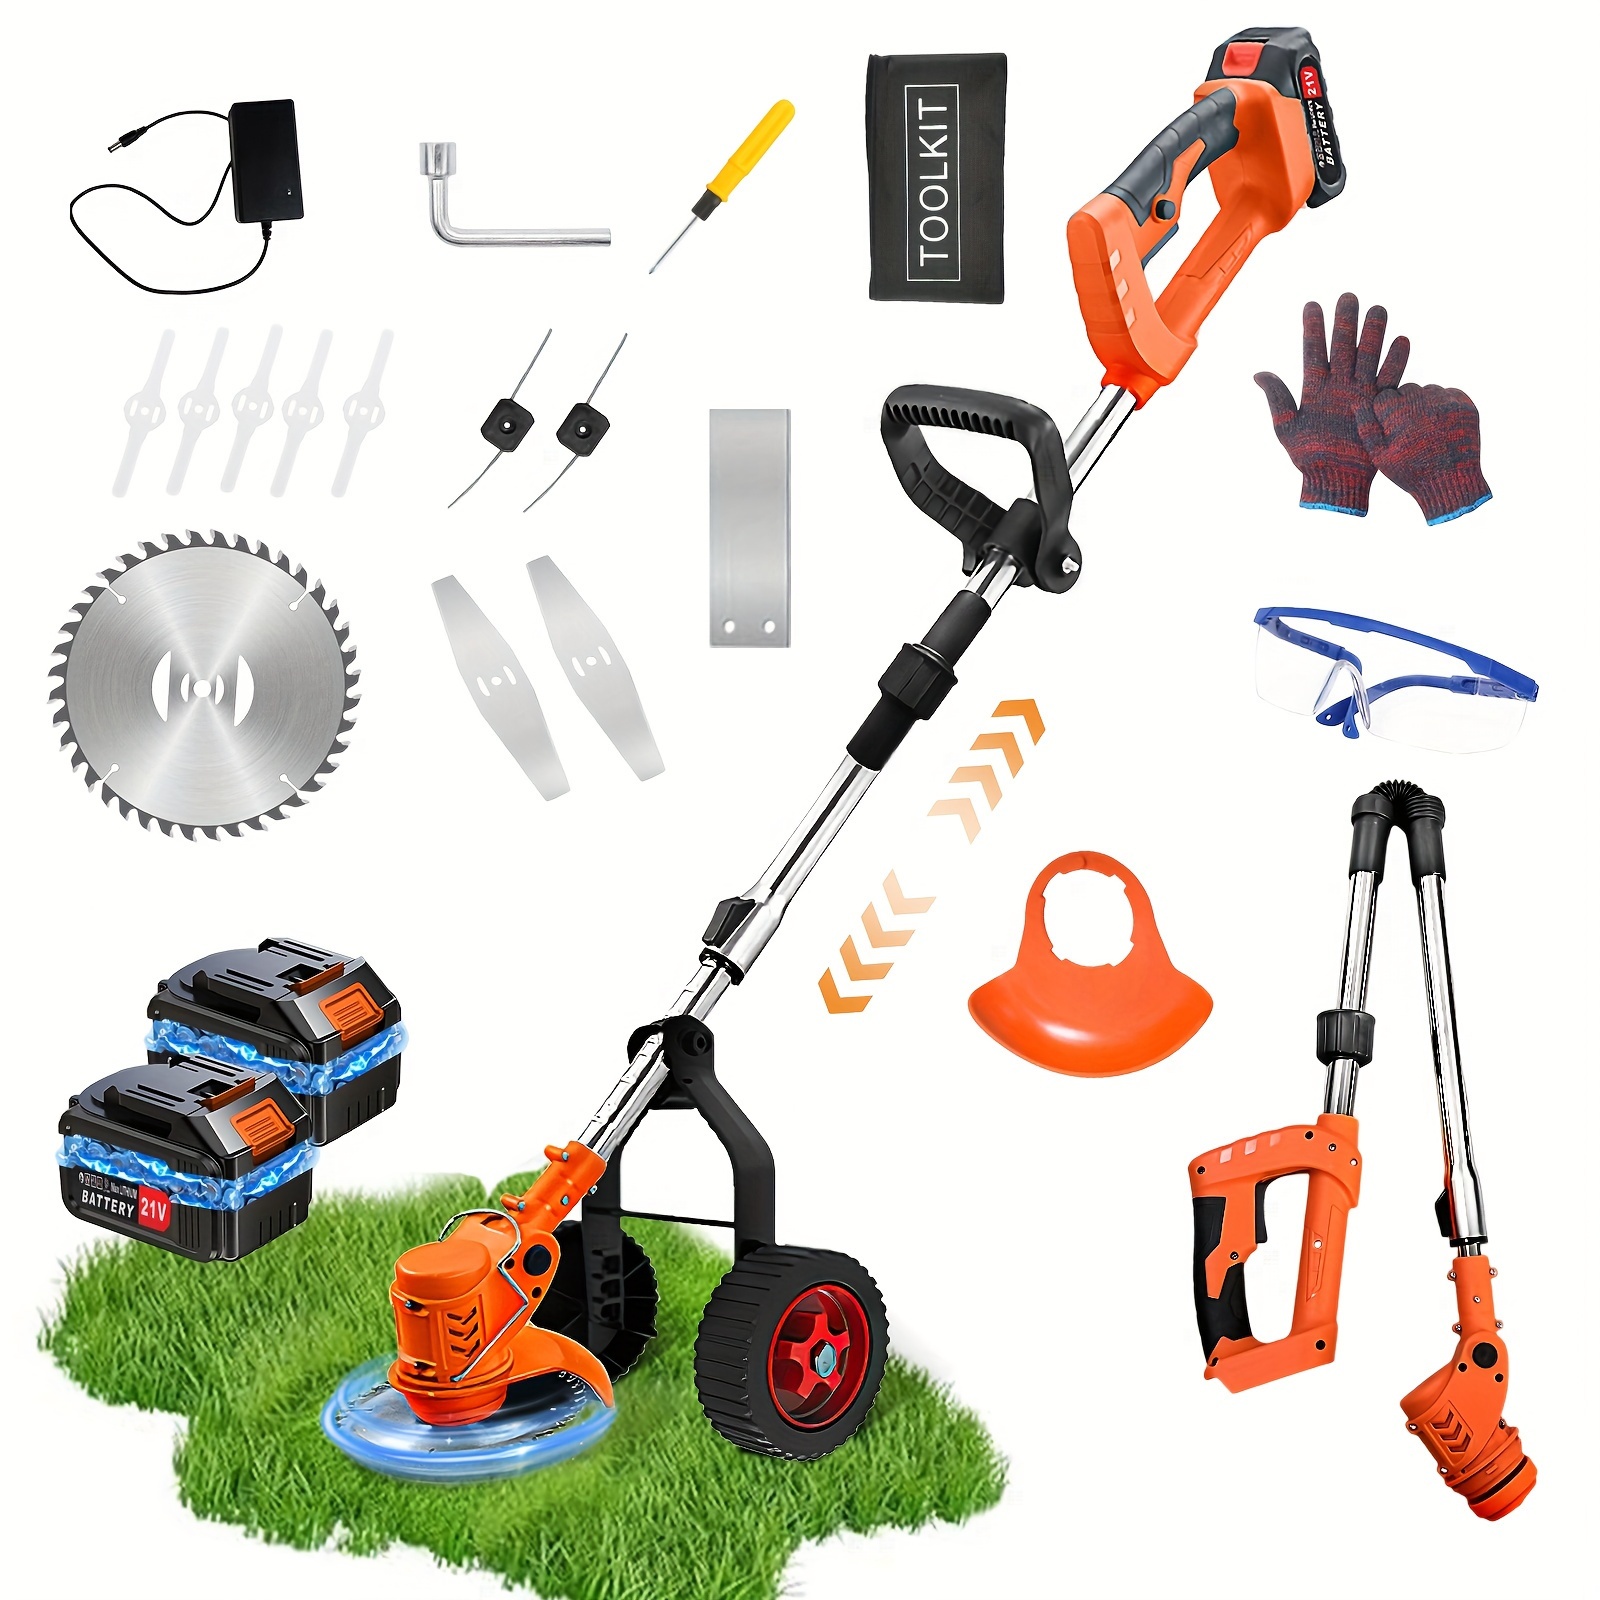 

Electric With Wheels Cordless 21v No String Grass Trimmer With 2 * 2.0ah Battery Powered And 3 Types Blade, Adjustable Lawn Grass Edger Brush Cutter Weeder Tool Garden And Yard